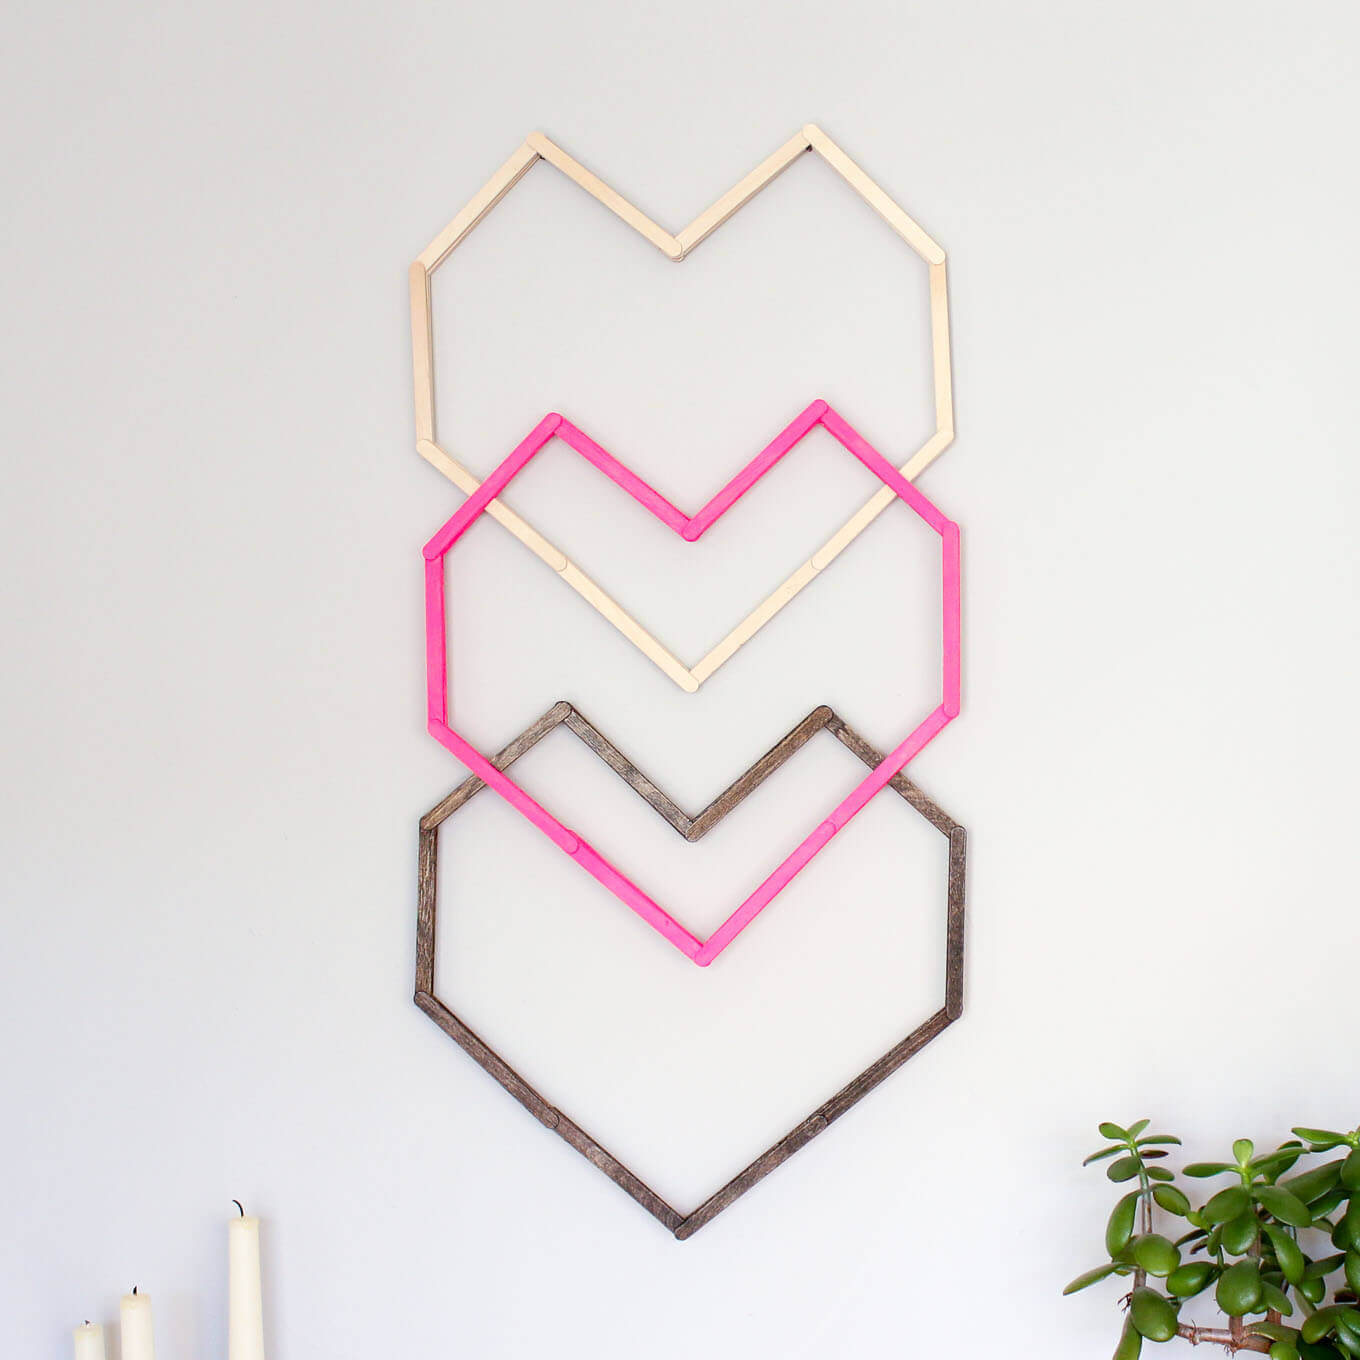 18 Creative DIY Wall Art Ideas You Should Try Making